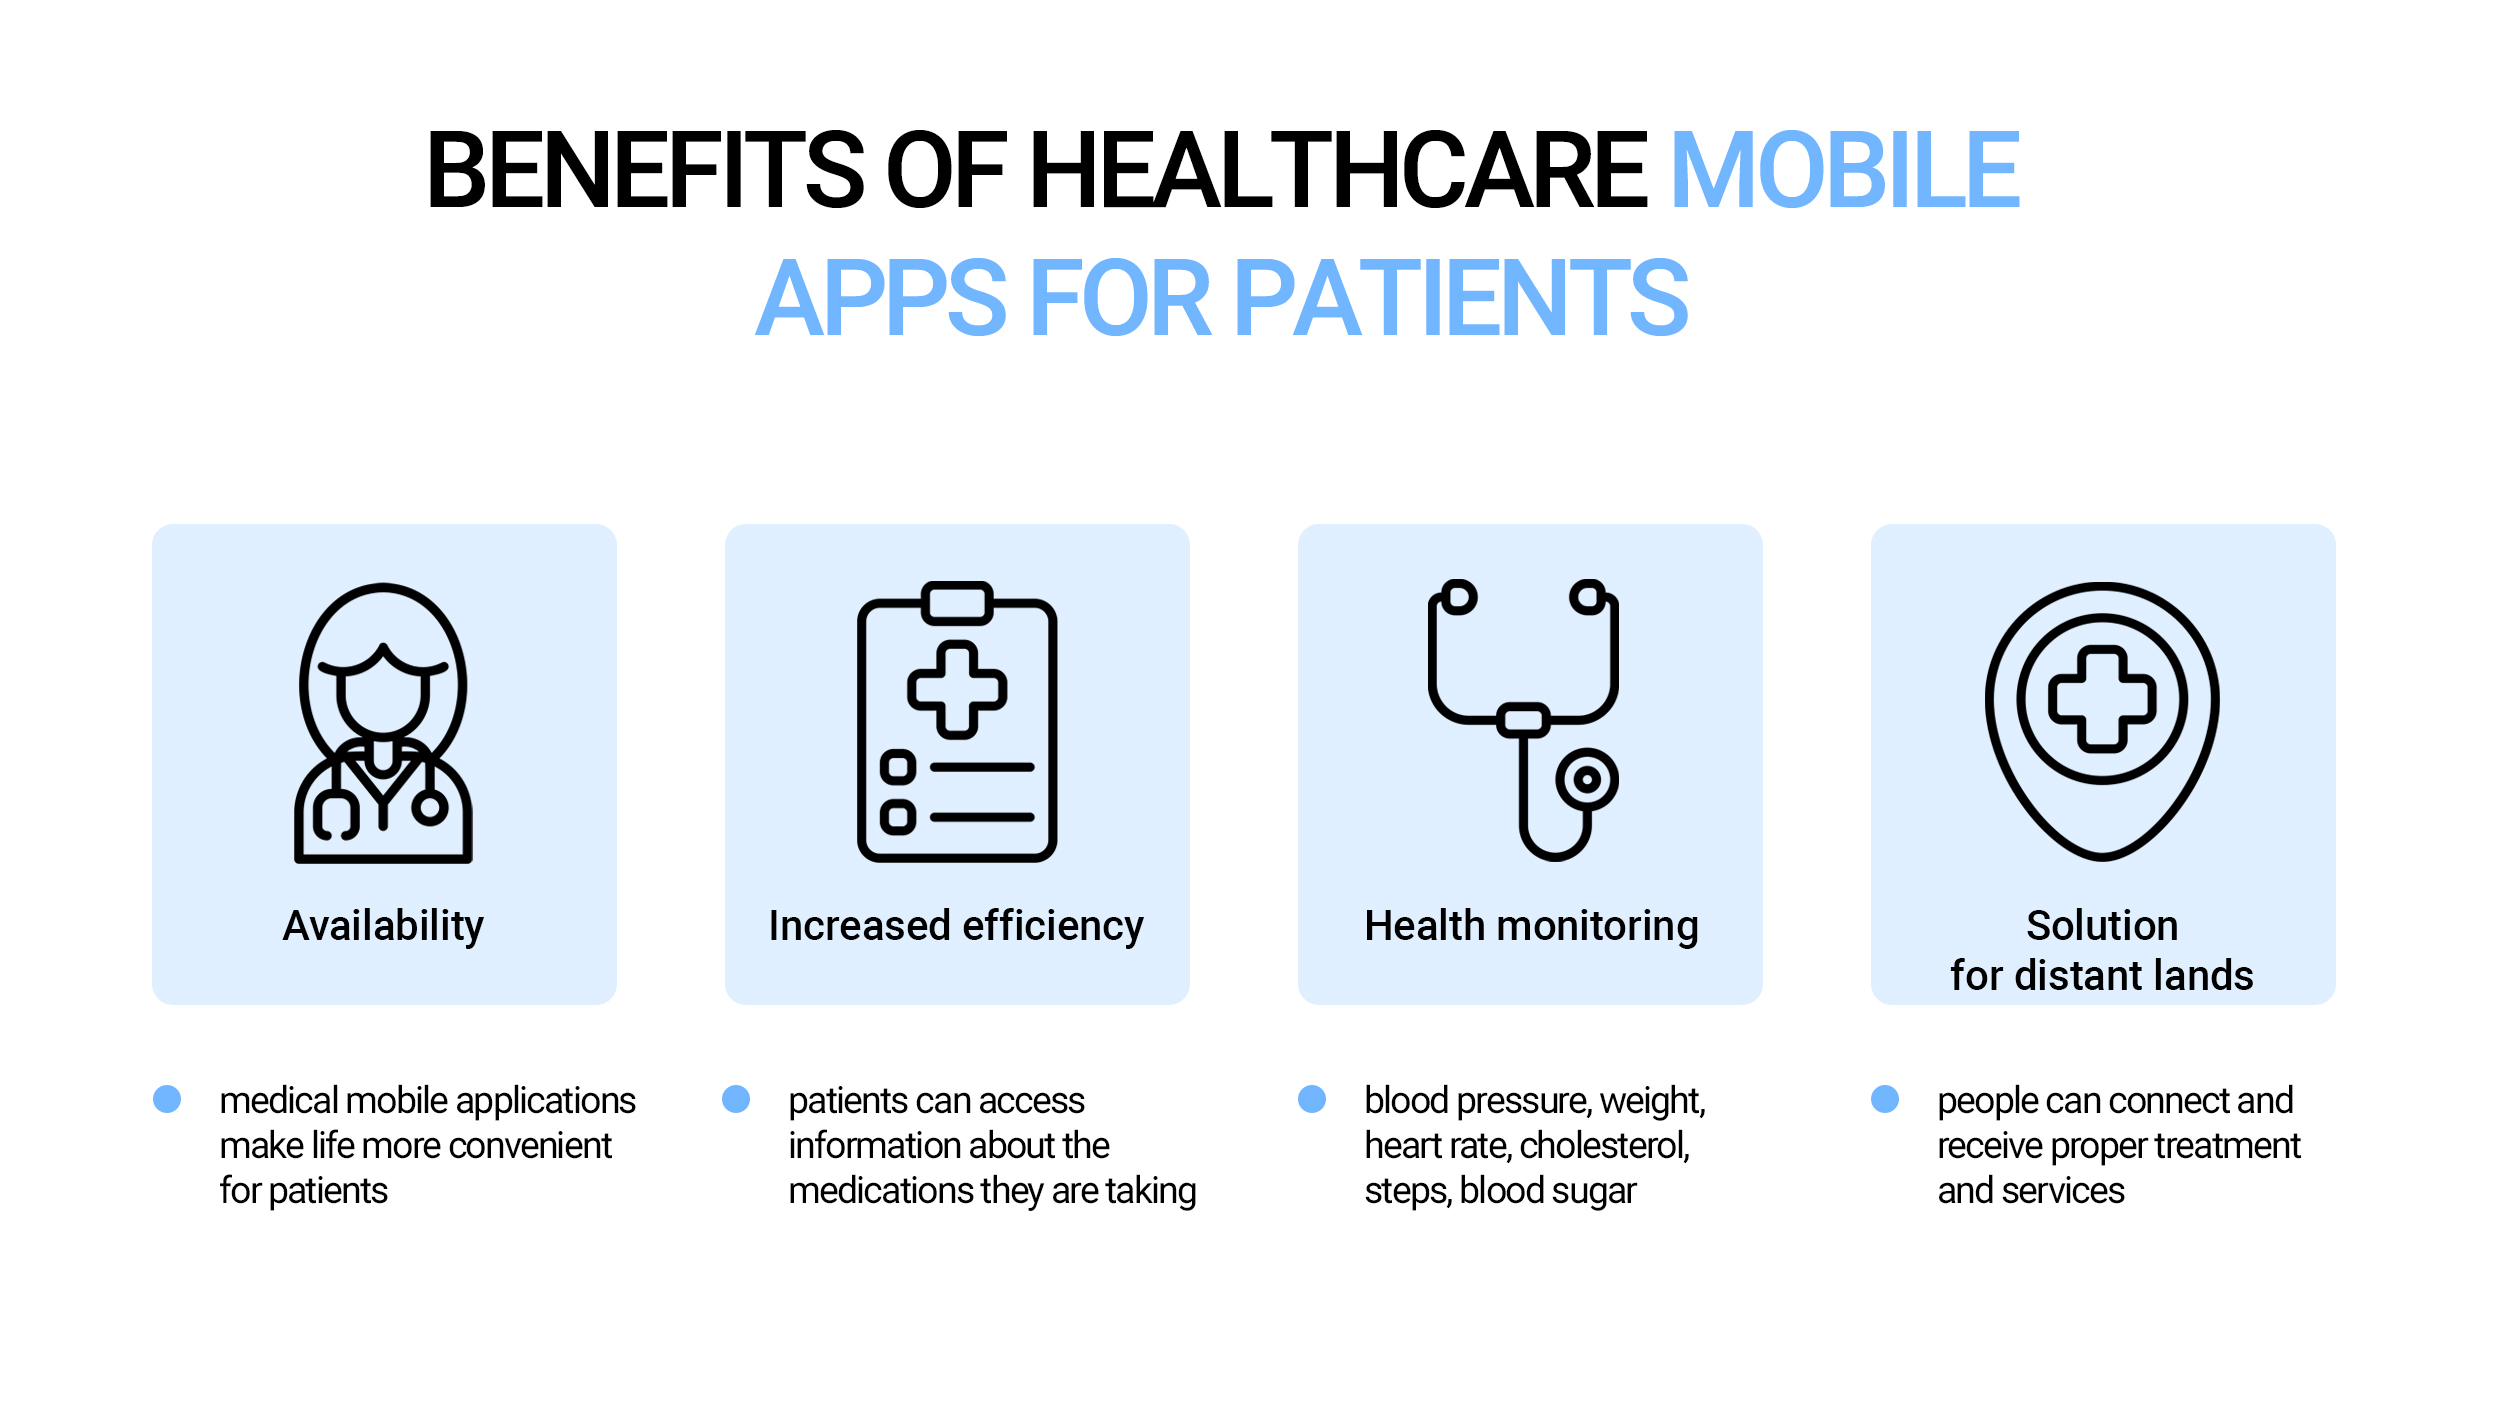 Benefits of healthcare mobile apps for patients